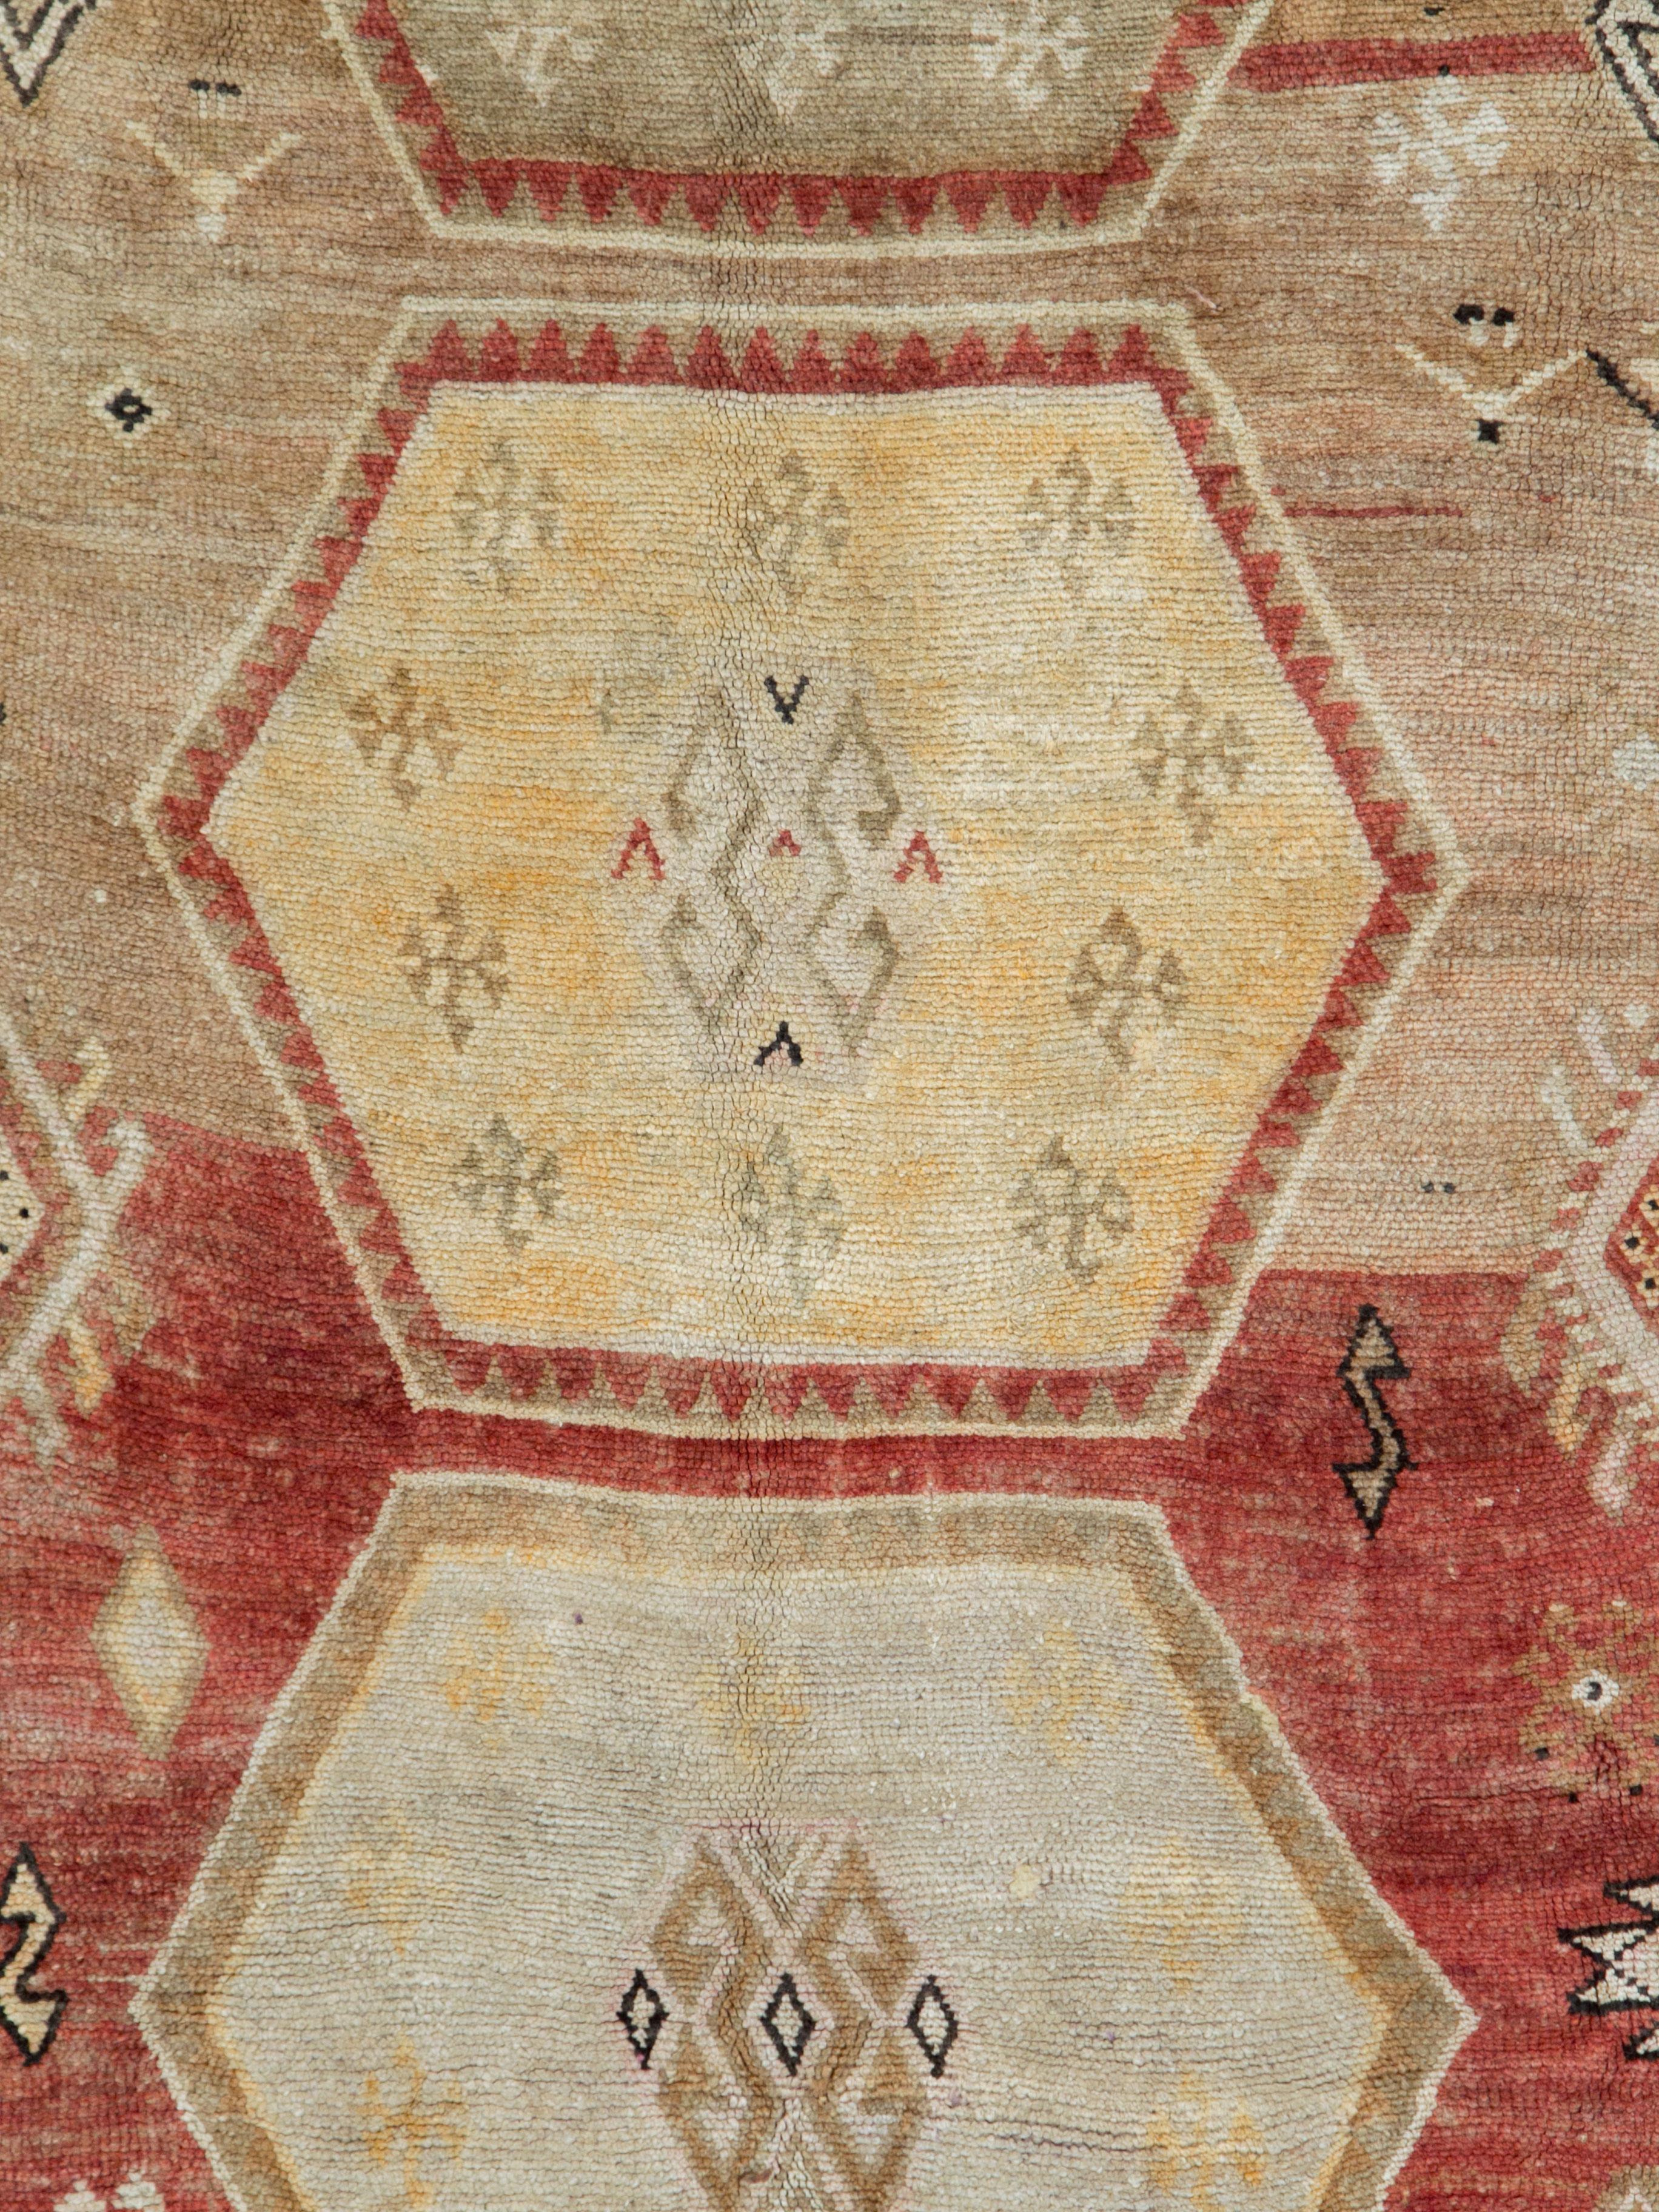 A vintage Turkish Anatolian rug from the mid-20th century in gallery format.